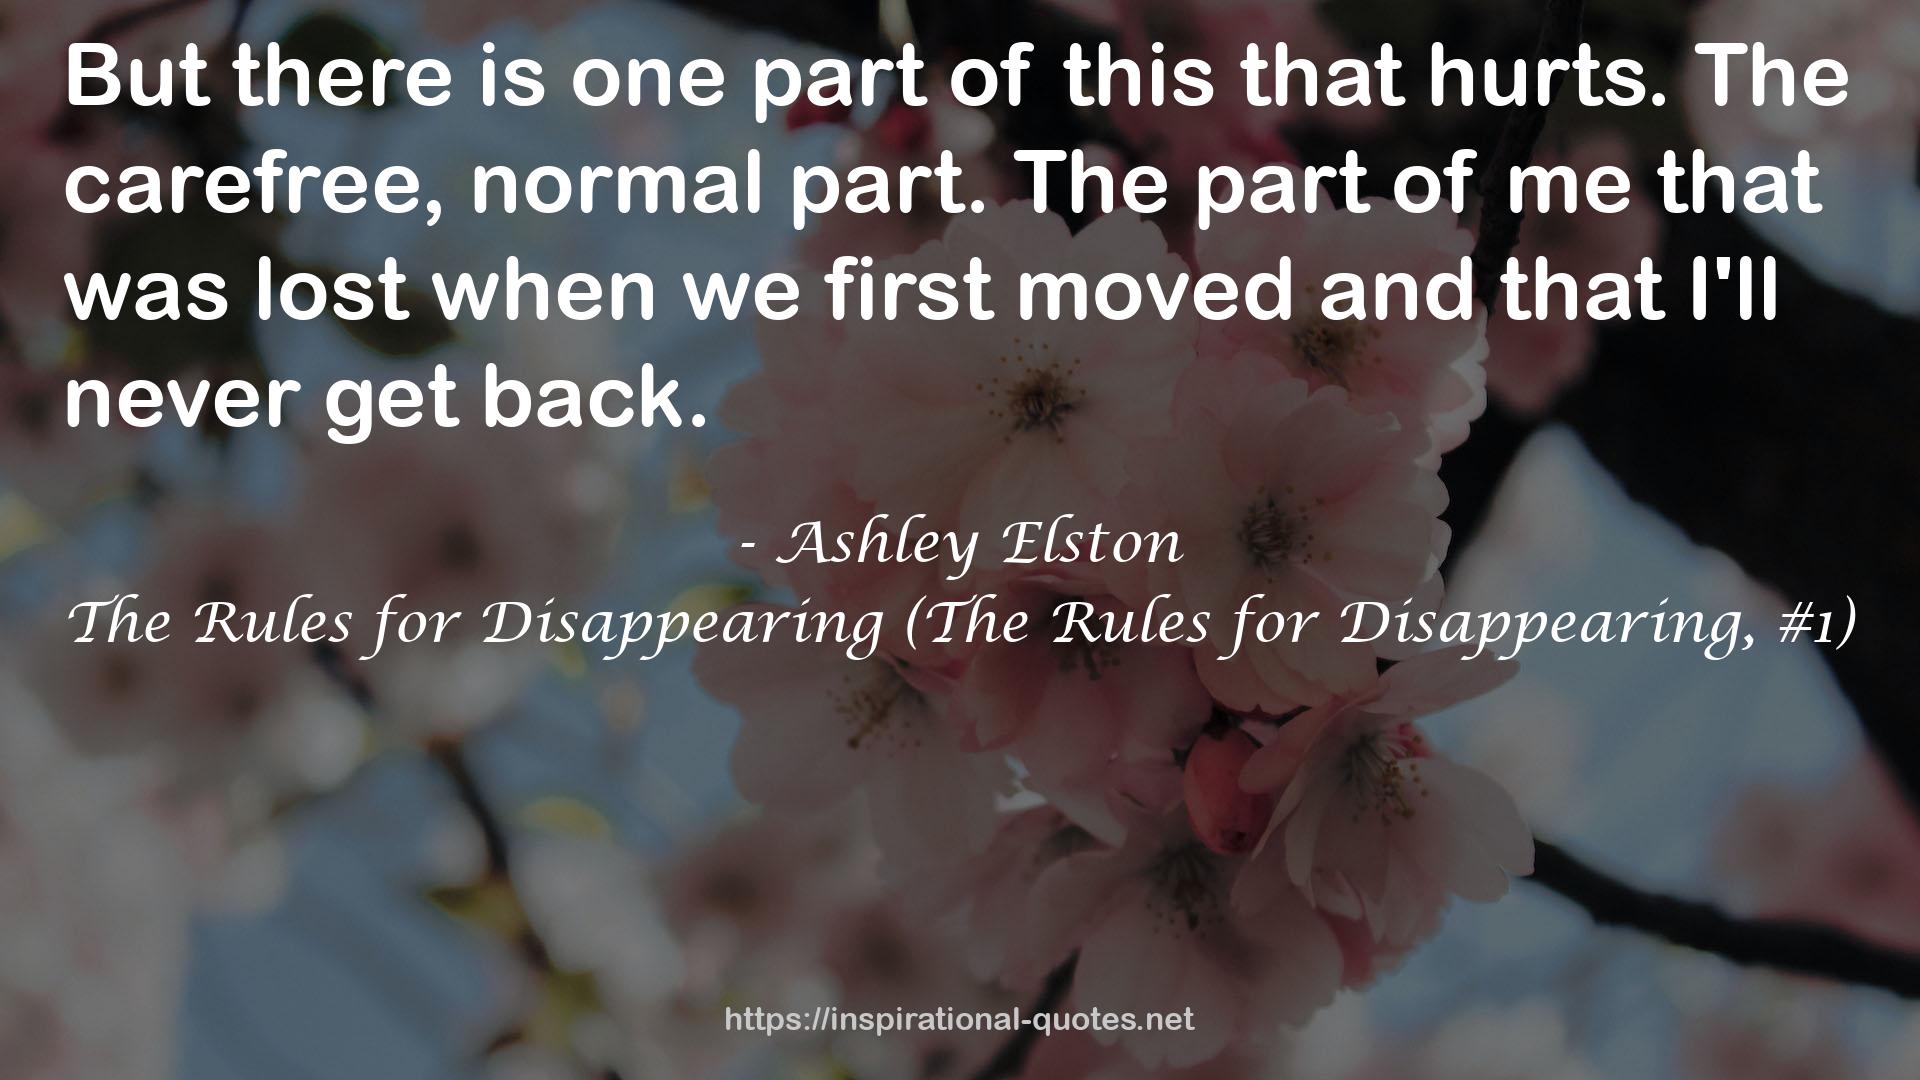 The Rules for Disappearing (The Rules for Disappearing, #1) QUOTES